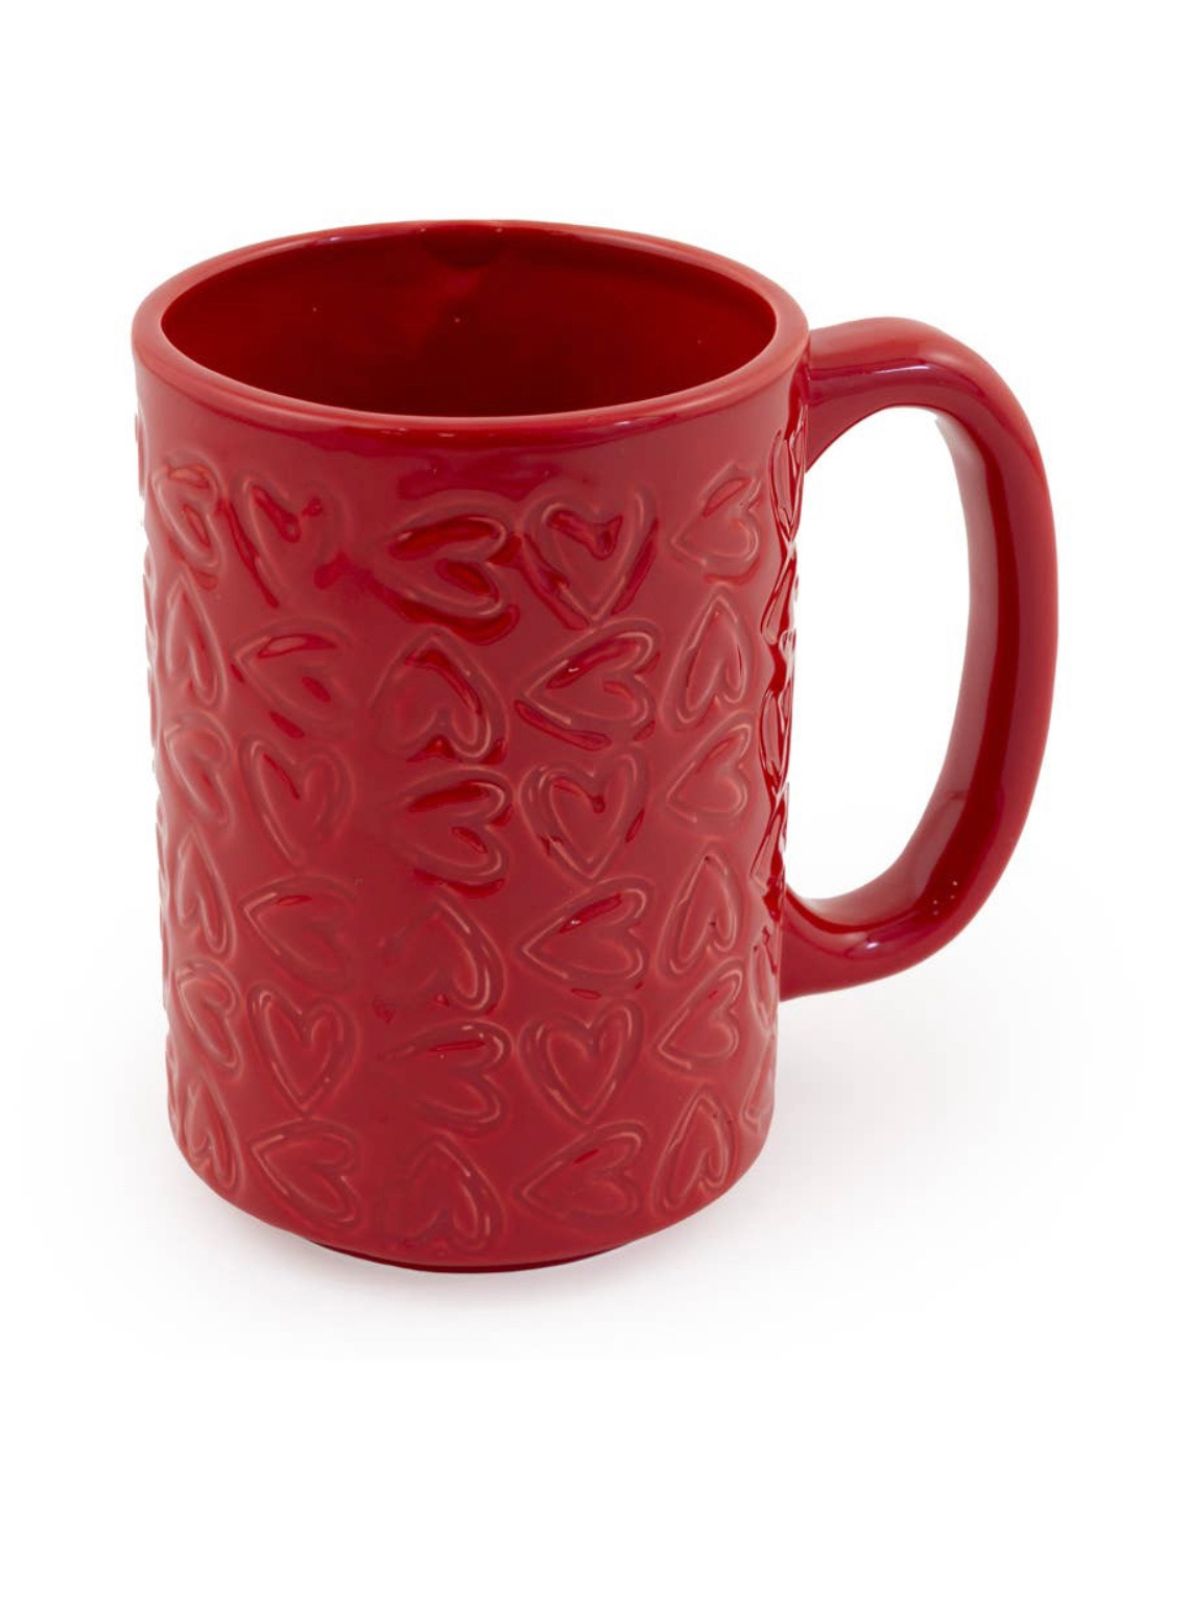 16oz Red Ceramic Coffee Mug with Valentine Hearts on the exterior sold by KYA Home Decor. 